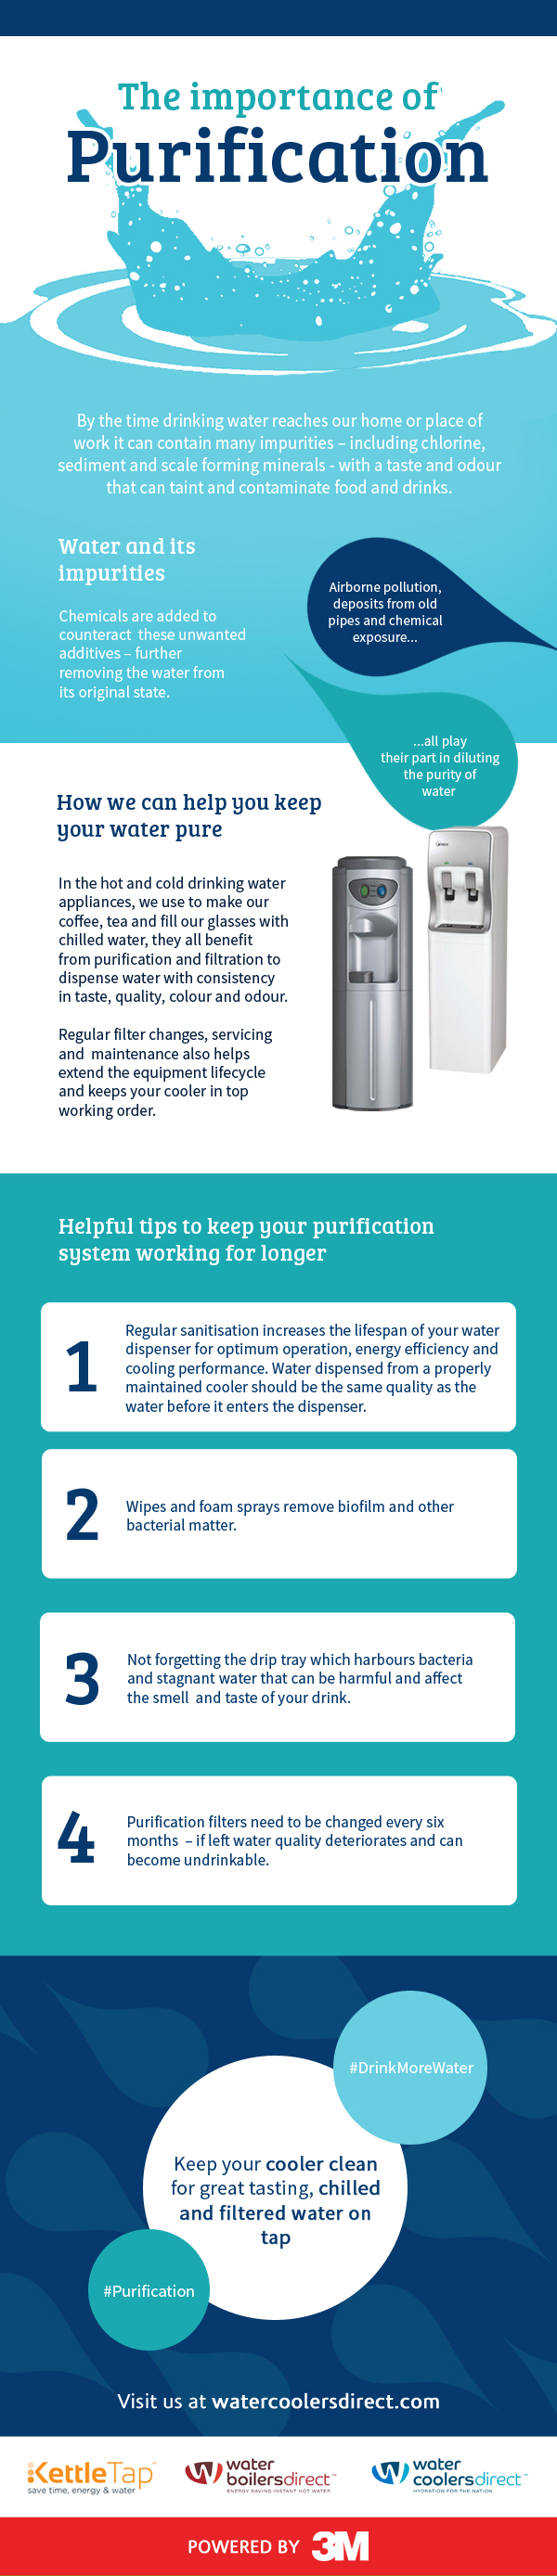 Infographic describing how water purification can affect your overall health